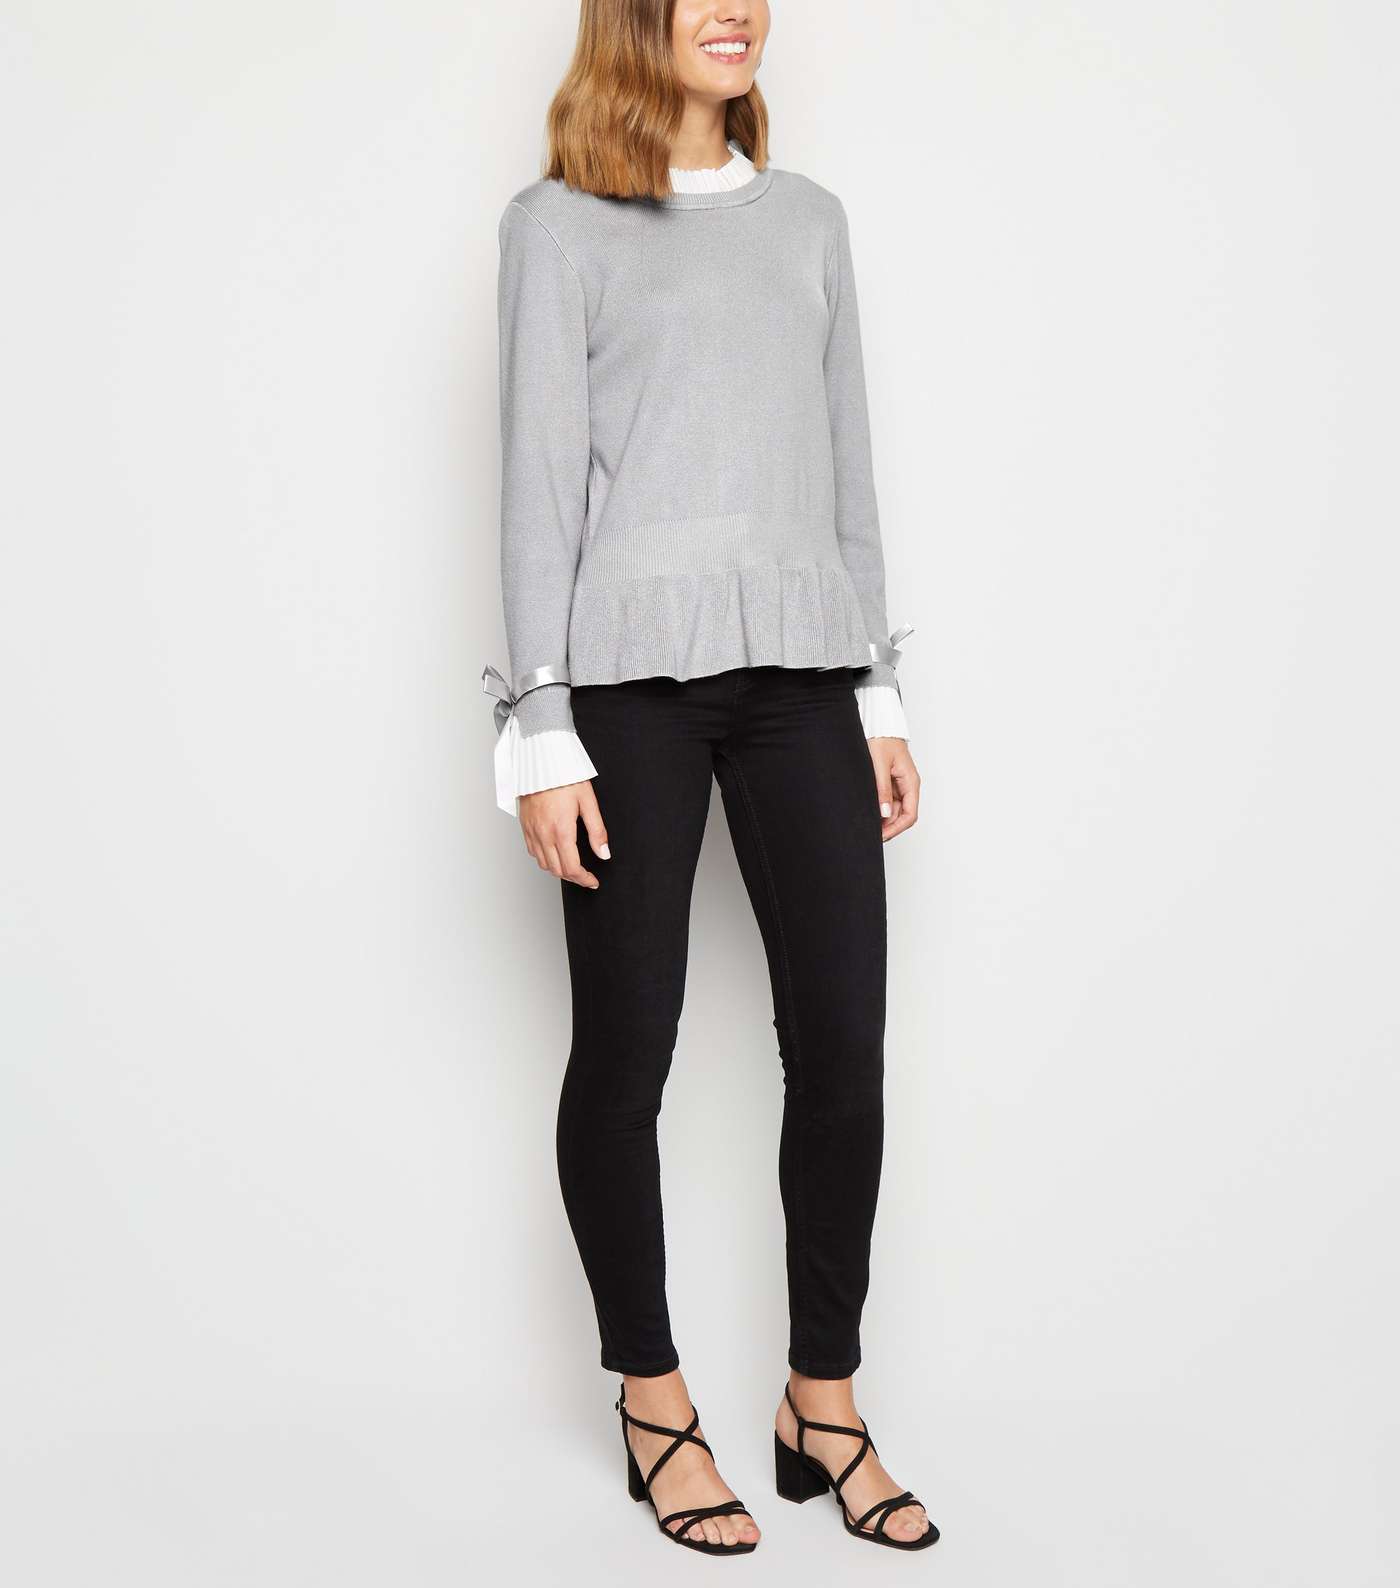 Pale Grey Frill 2 in 1 Jumper Image 2